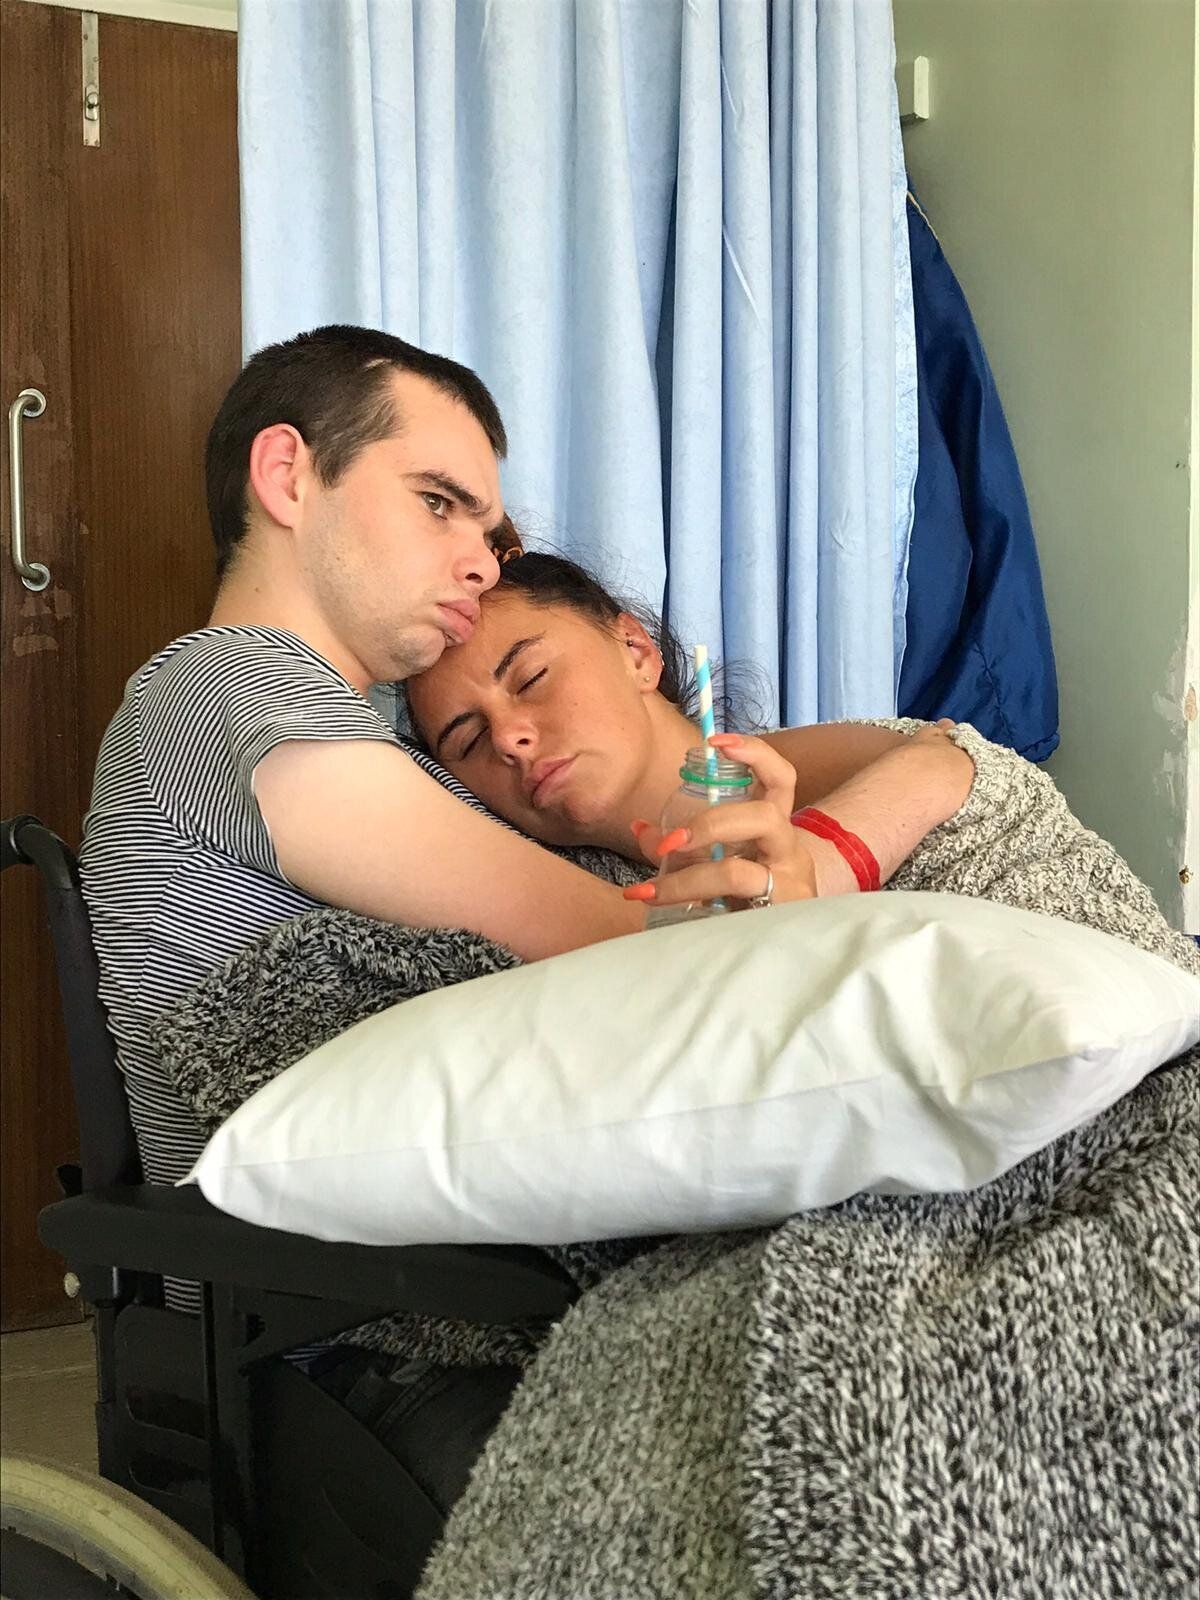 Bradley, 27, has a learning disability, severe epilepsy, cerebral palsy, is autistic and has other complex health issues. He has been in hospital 15 times since March.